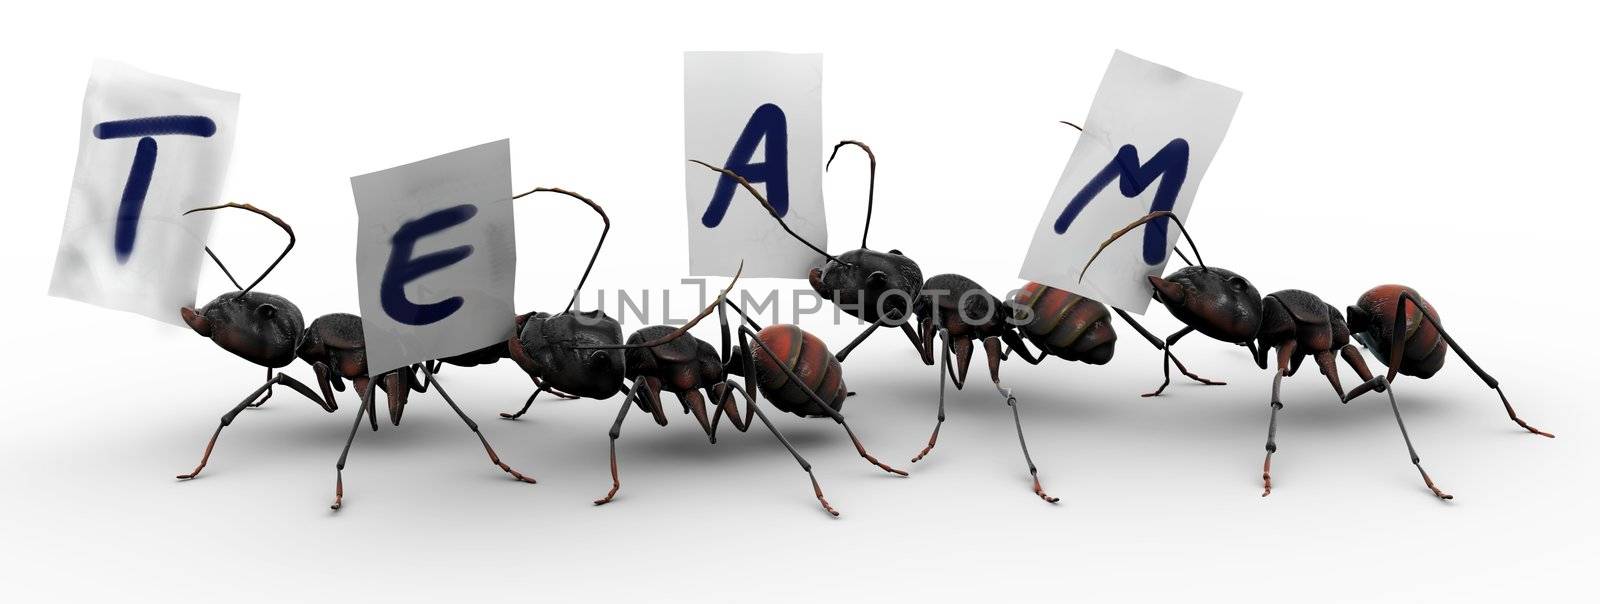 Four Ants Four Ants Team Work by LeoBlanchette